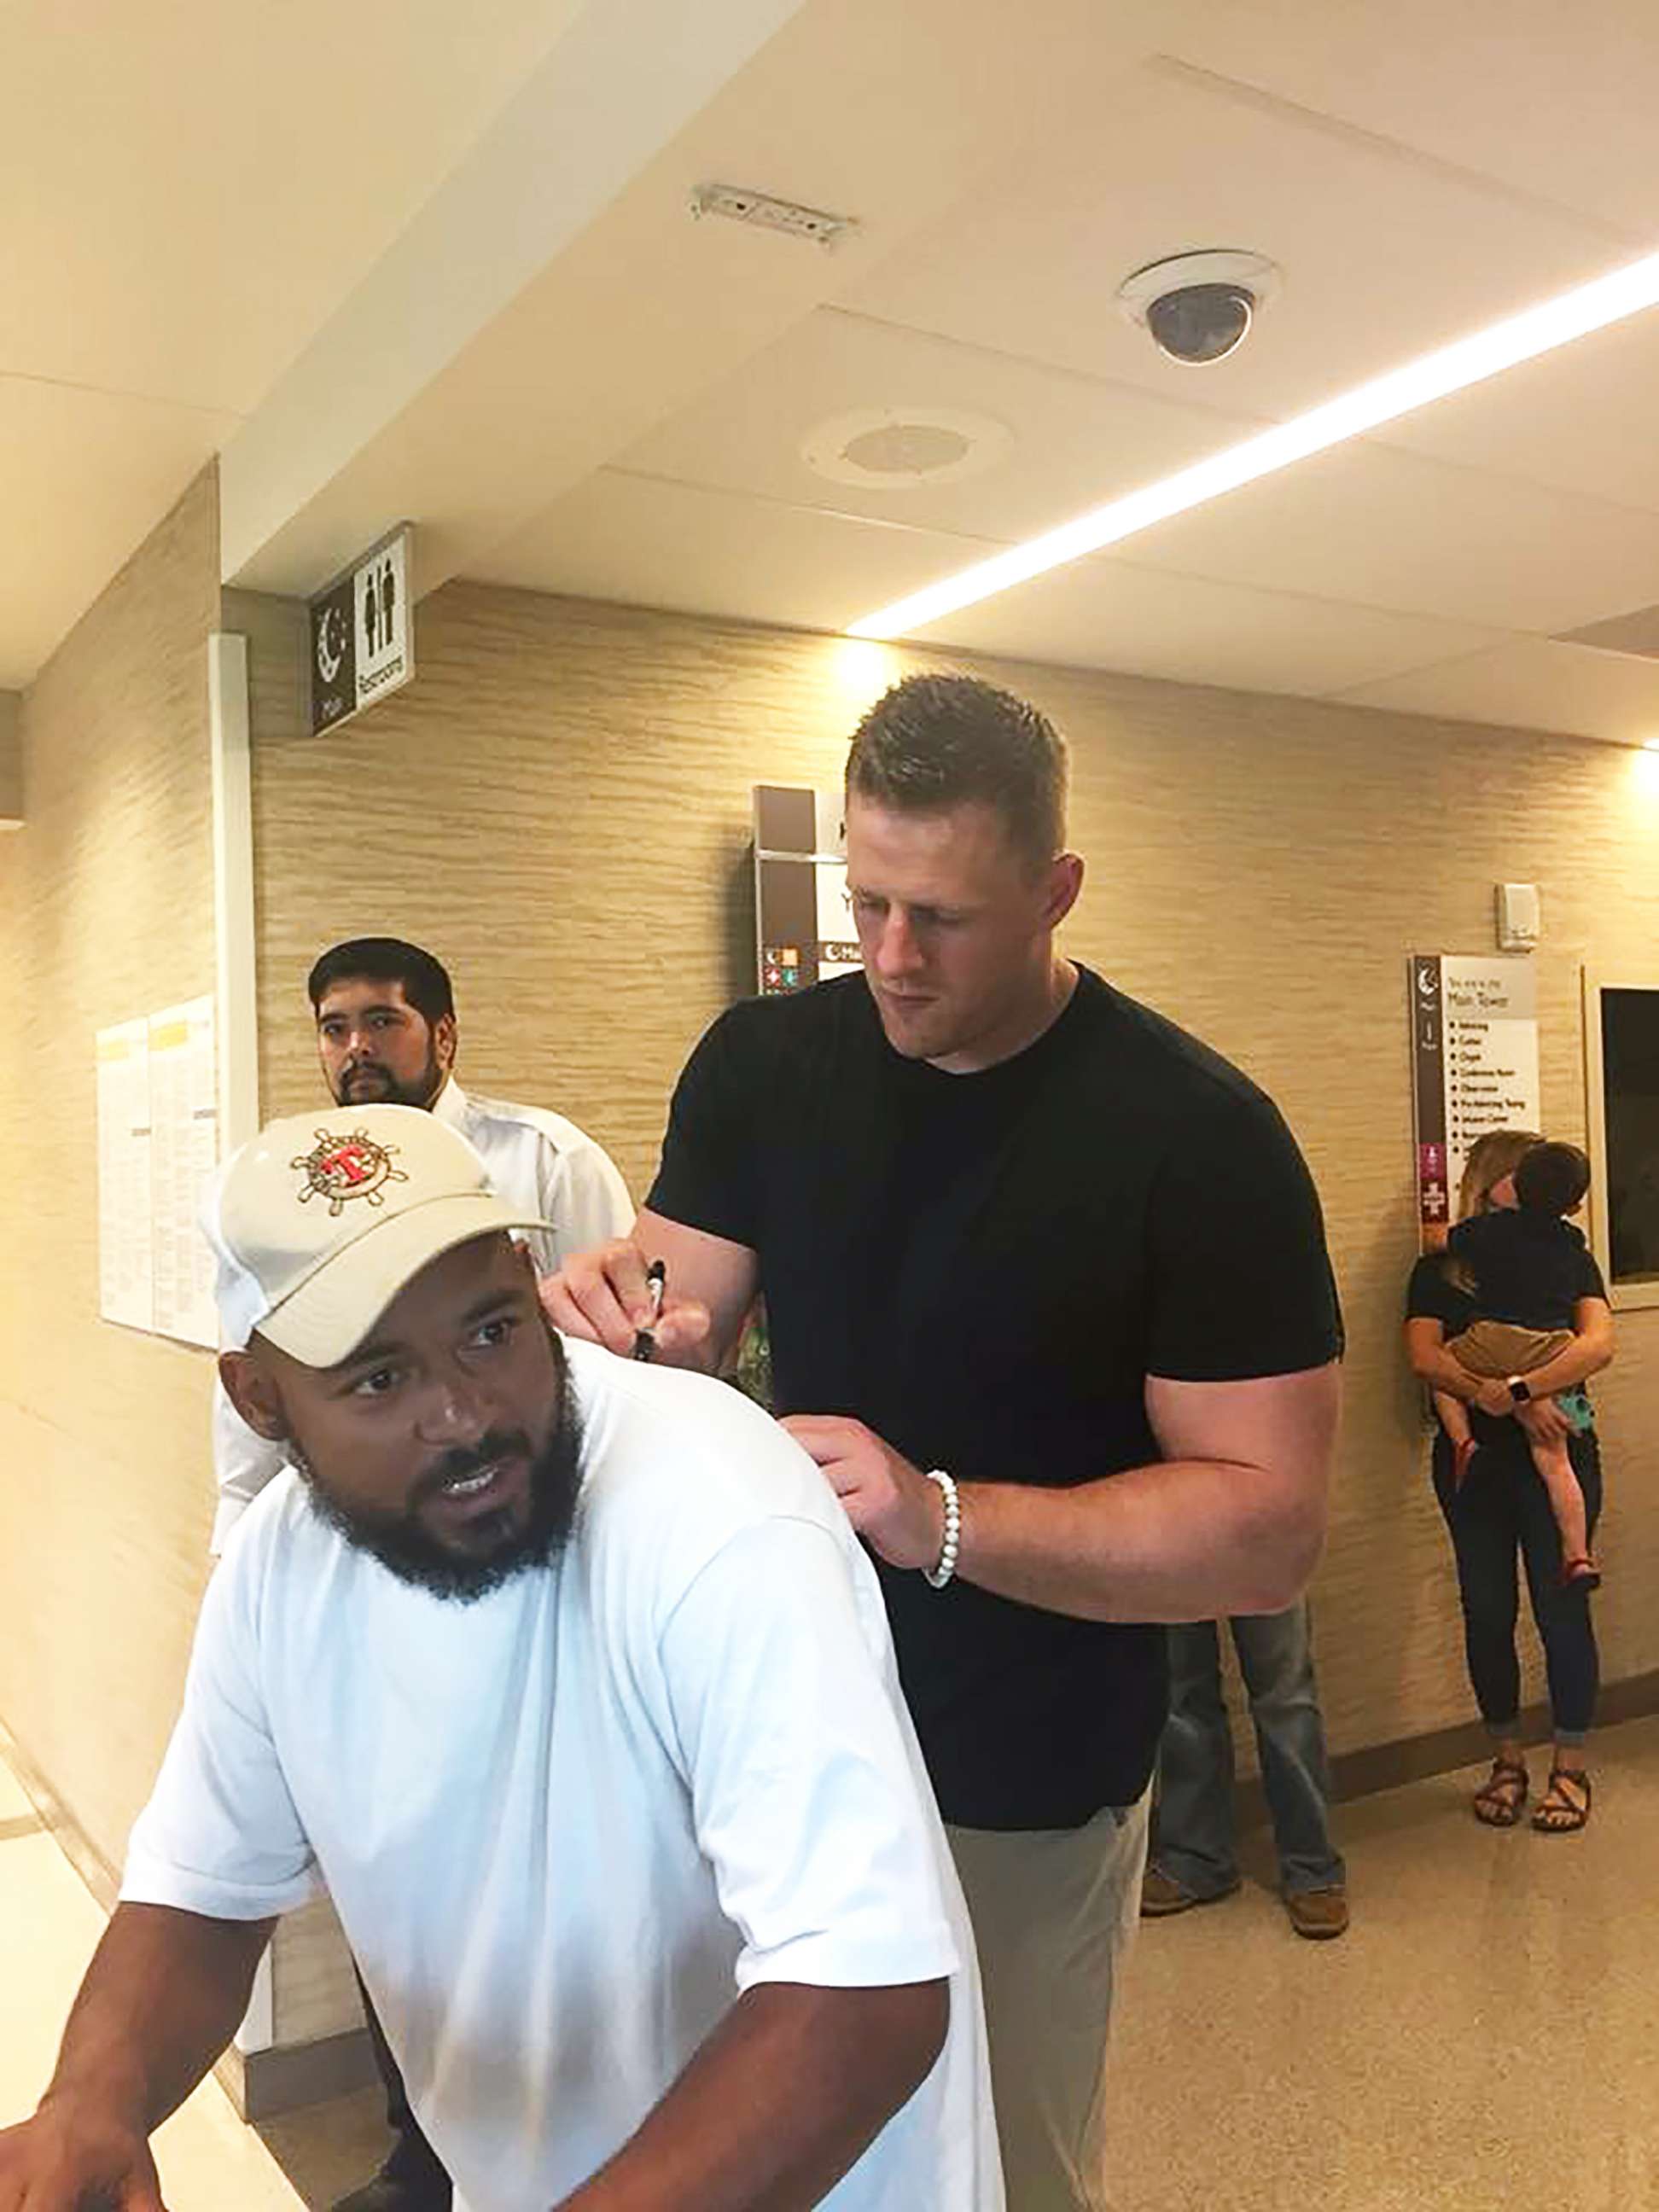 PHOTO: Houston Texans' star J.J. Watt visited with survivors of the Santa Fe High School shooting at Clear Lake Regional Medical Center on May 22, 2018, and stopped to take photos with nurses who have been working to care for the wounded.